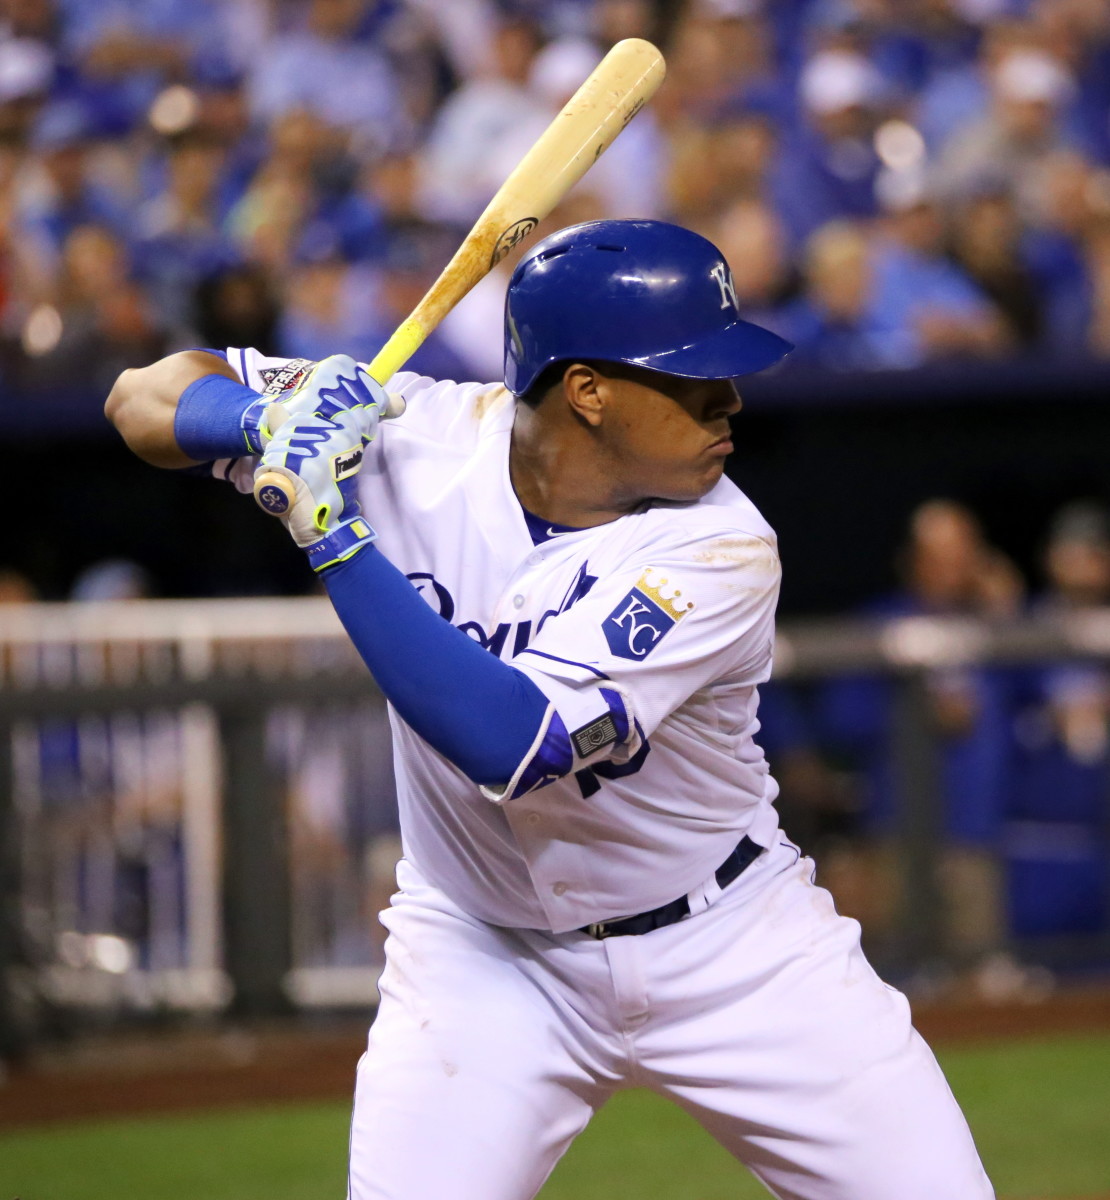 Who Are the Top 5 Home Run Hitters in Kansas City Royals History?